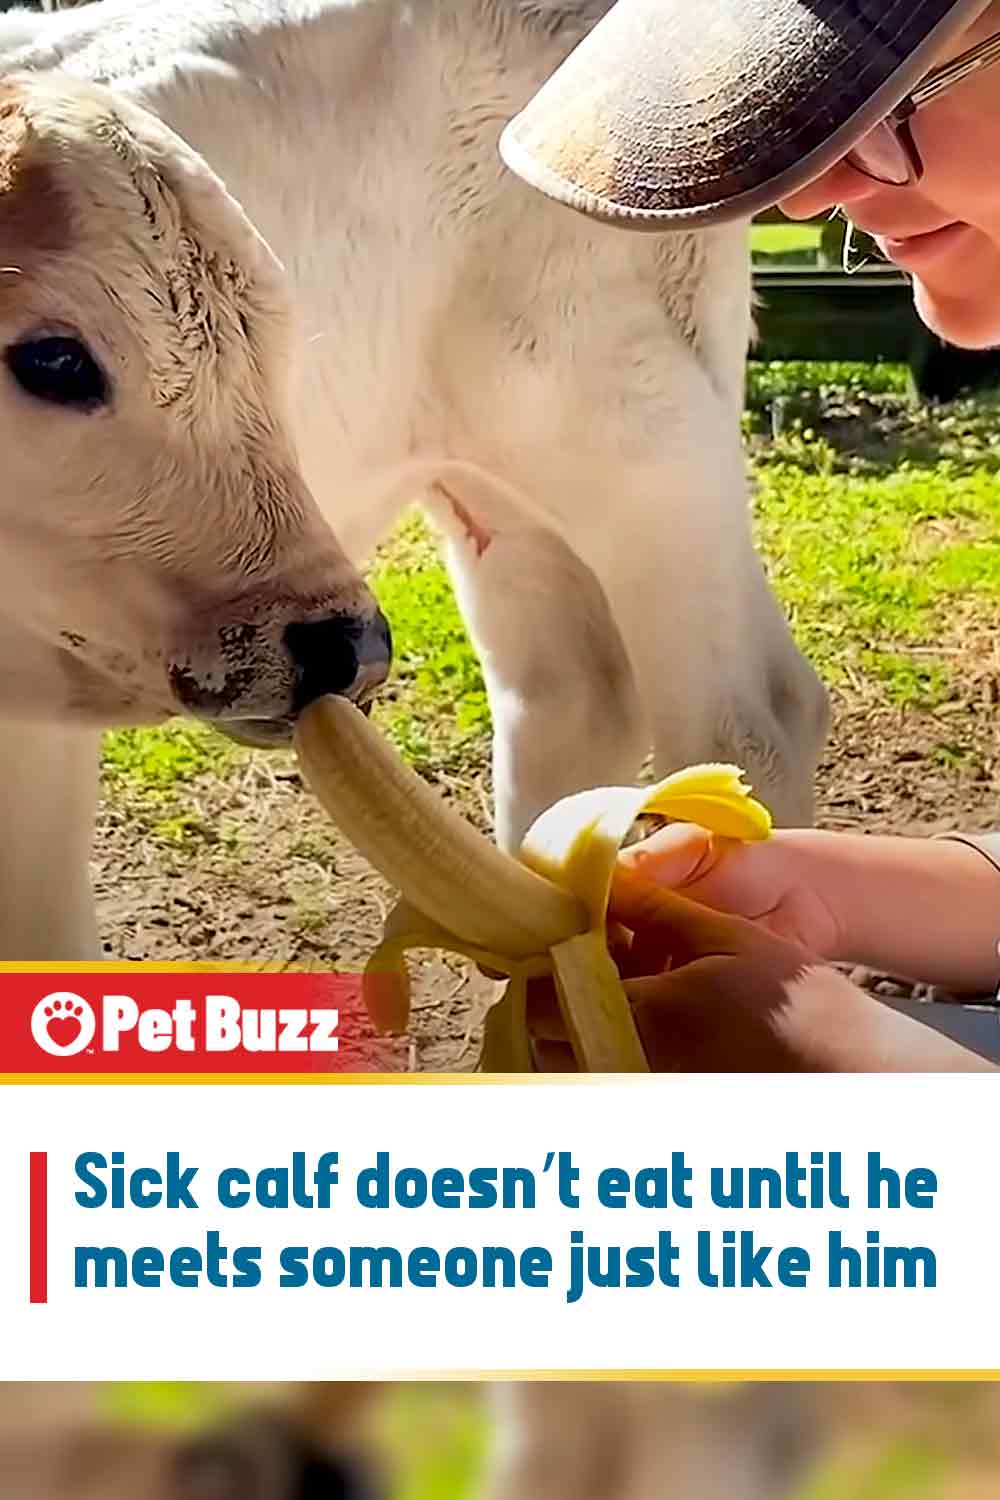 Sick calf doesn’t eat until he meets someone just like him